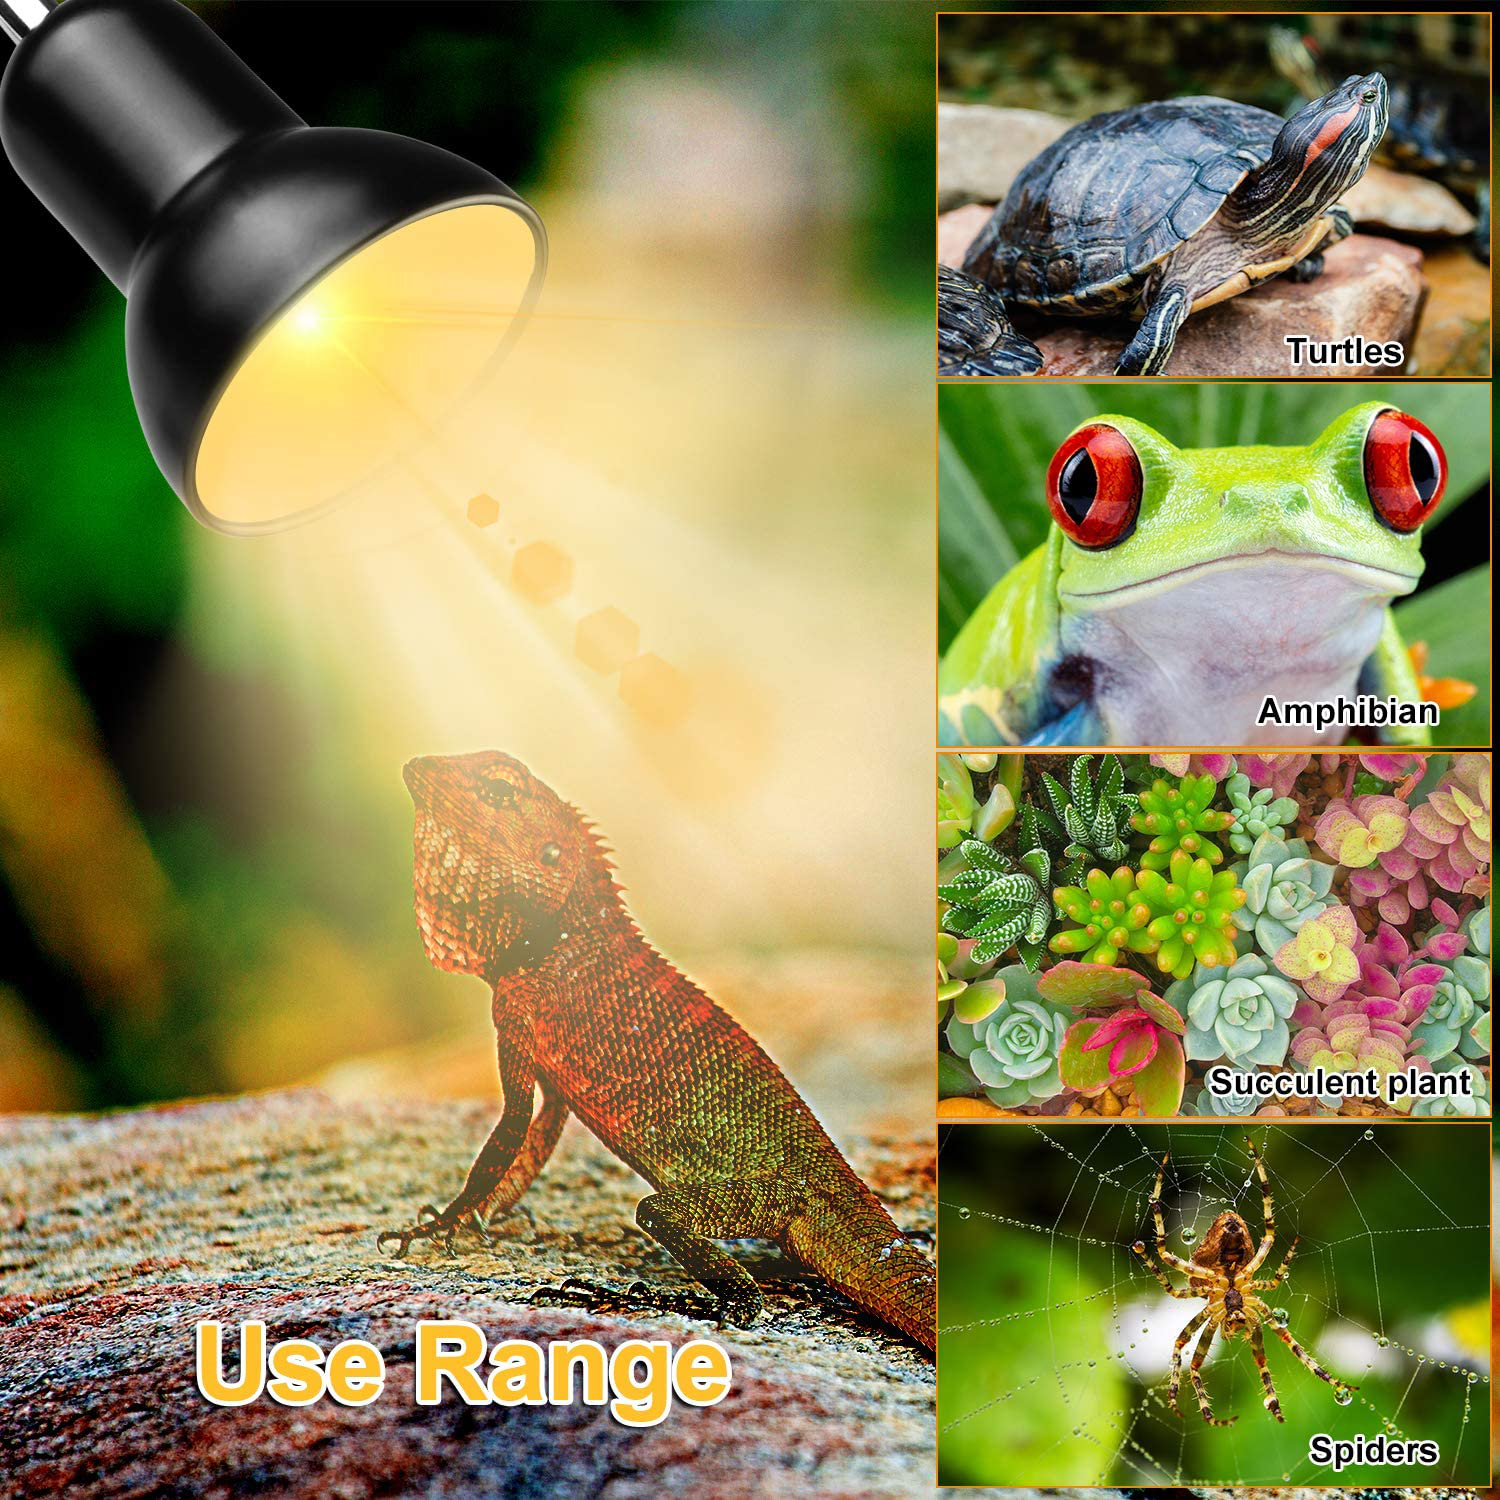 Reptile Heat Lamps, Turtle Lamp UVA/UVB Turtle Aquarium Tank Heating Lamps with Clamp, 360° Rotatable Basking Lamp for Lizard Turtle Snake Aquarium Aquatic Plants with 2 Heat Bulbs (E27,110V)